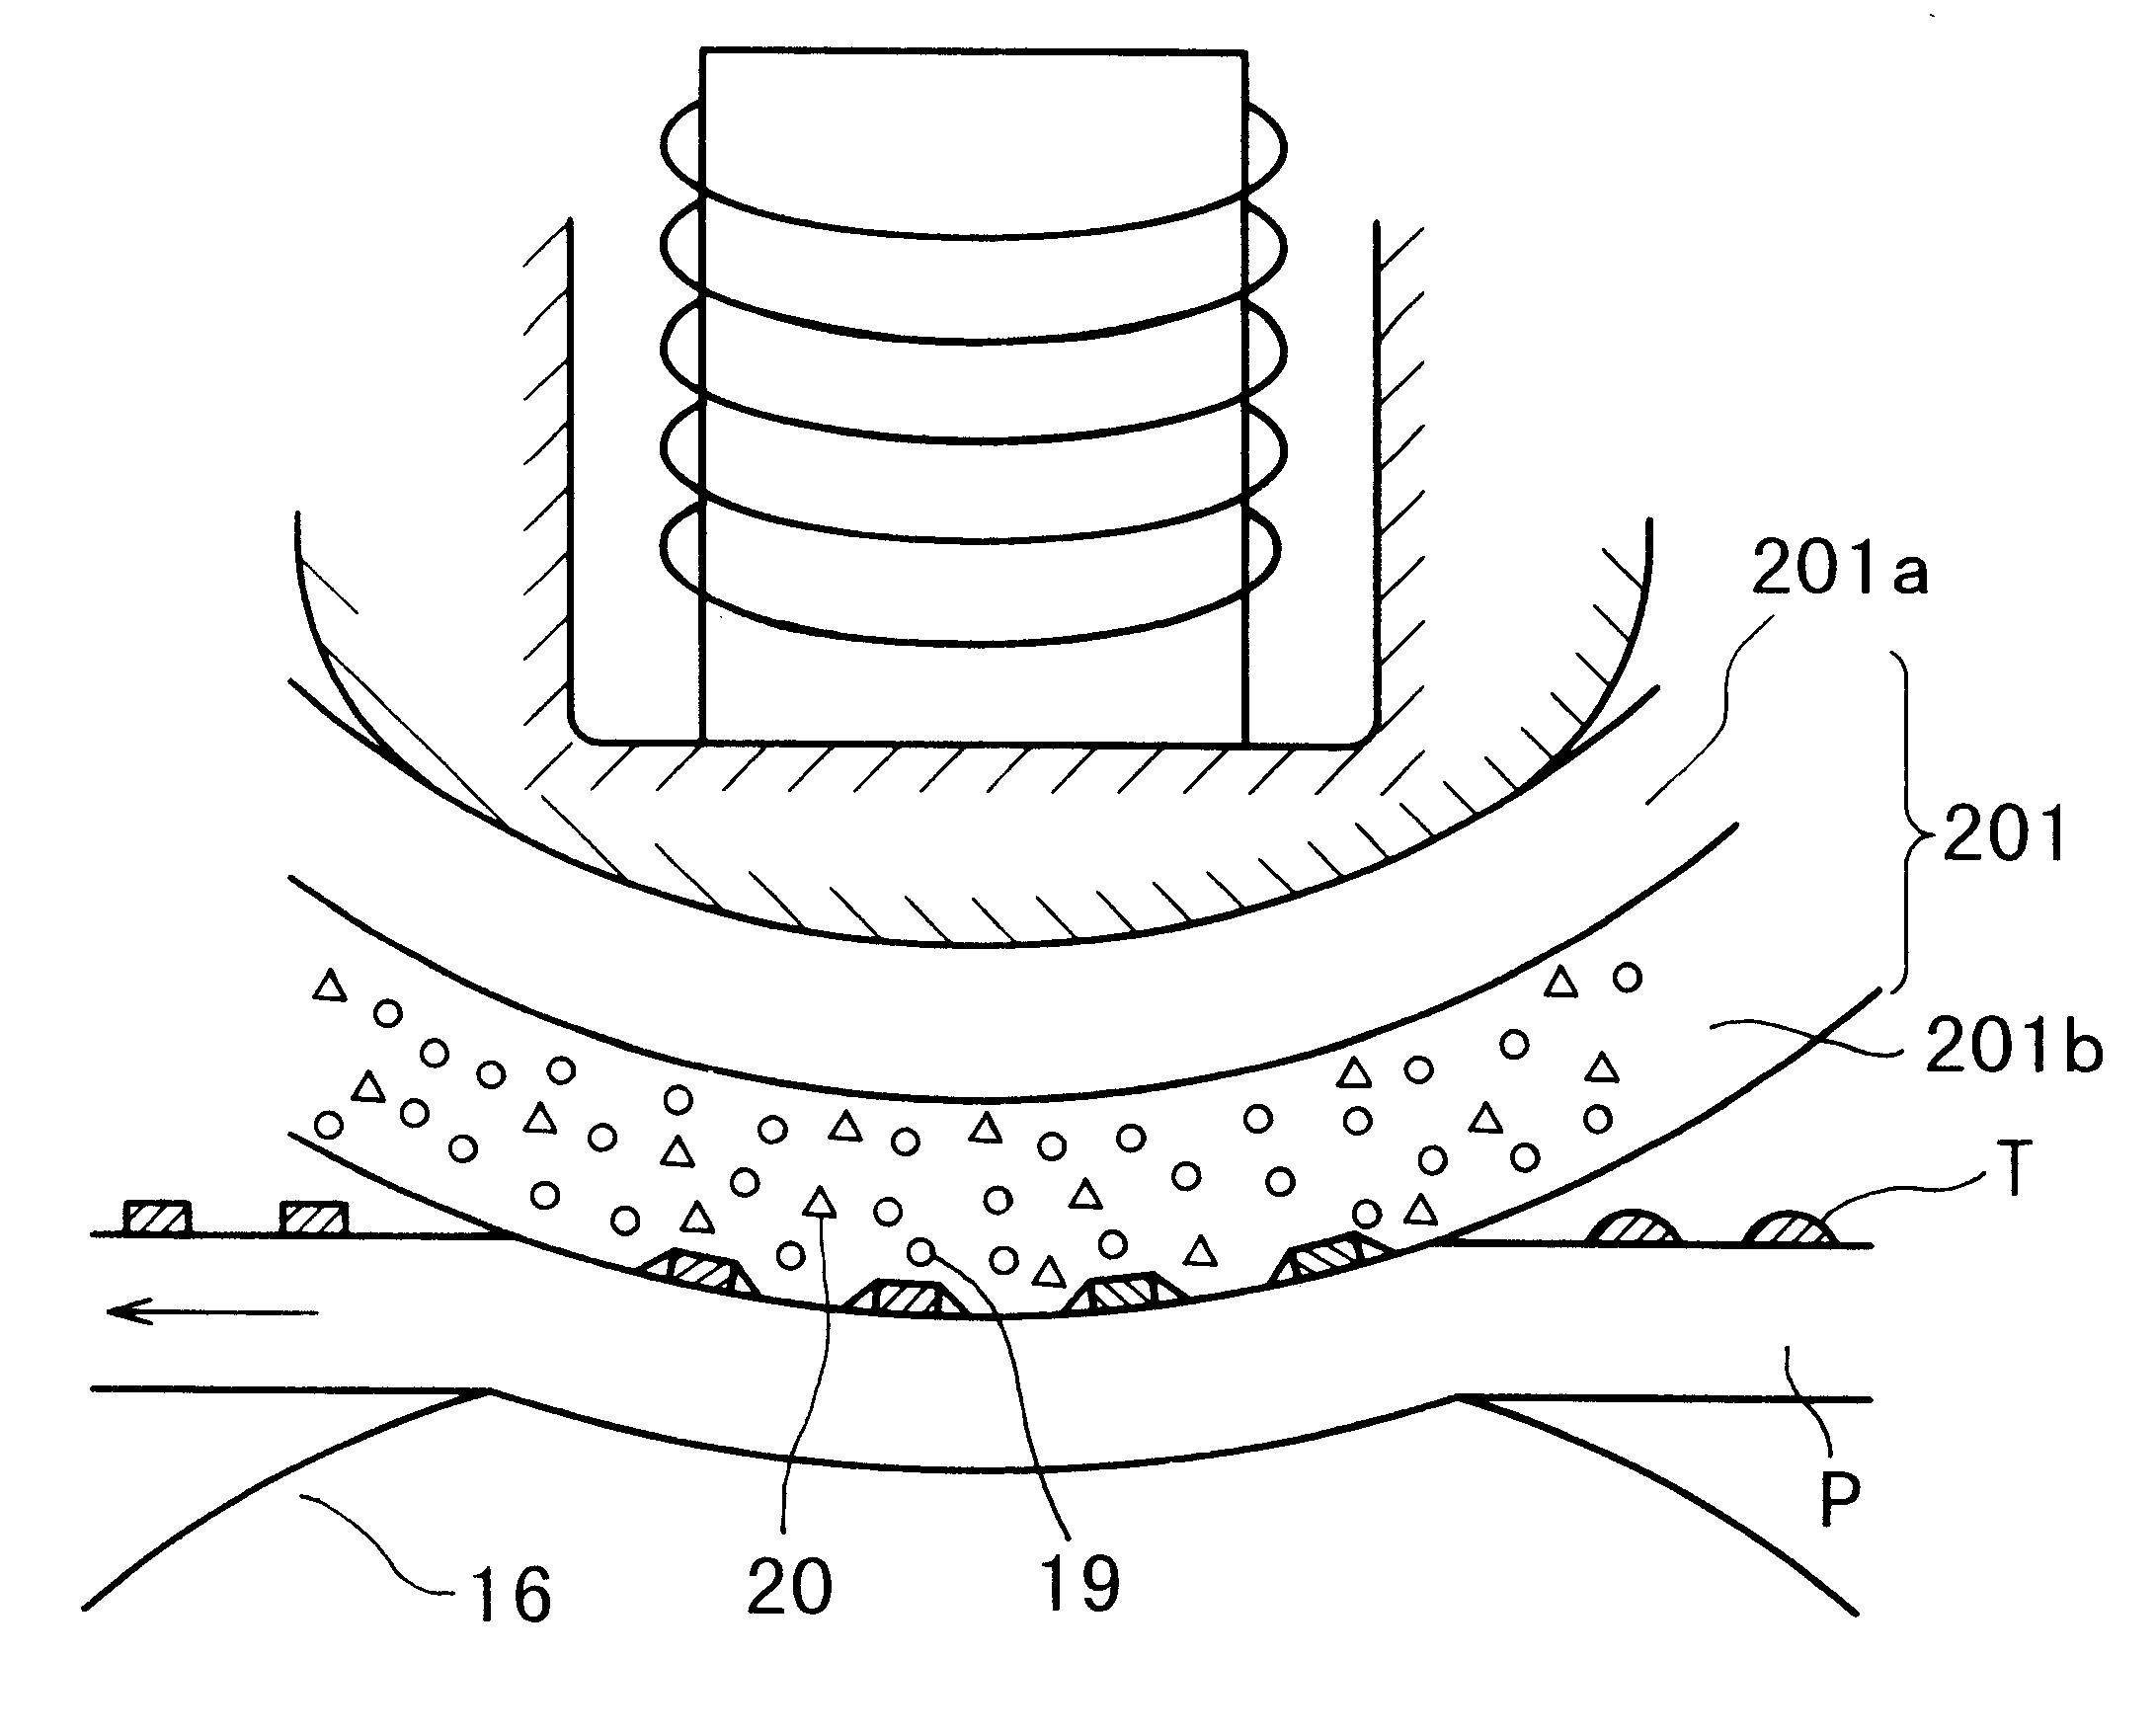 Heating device, image forming apparatus including the device and induction heating member included in the device